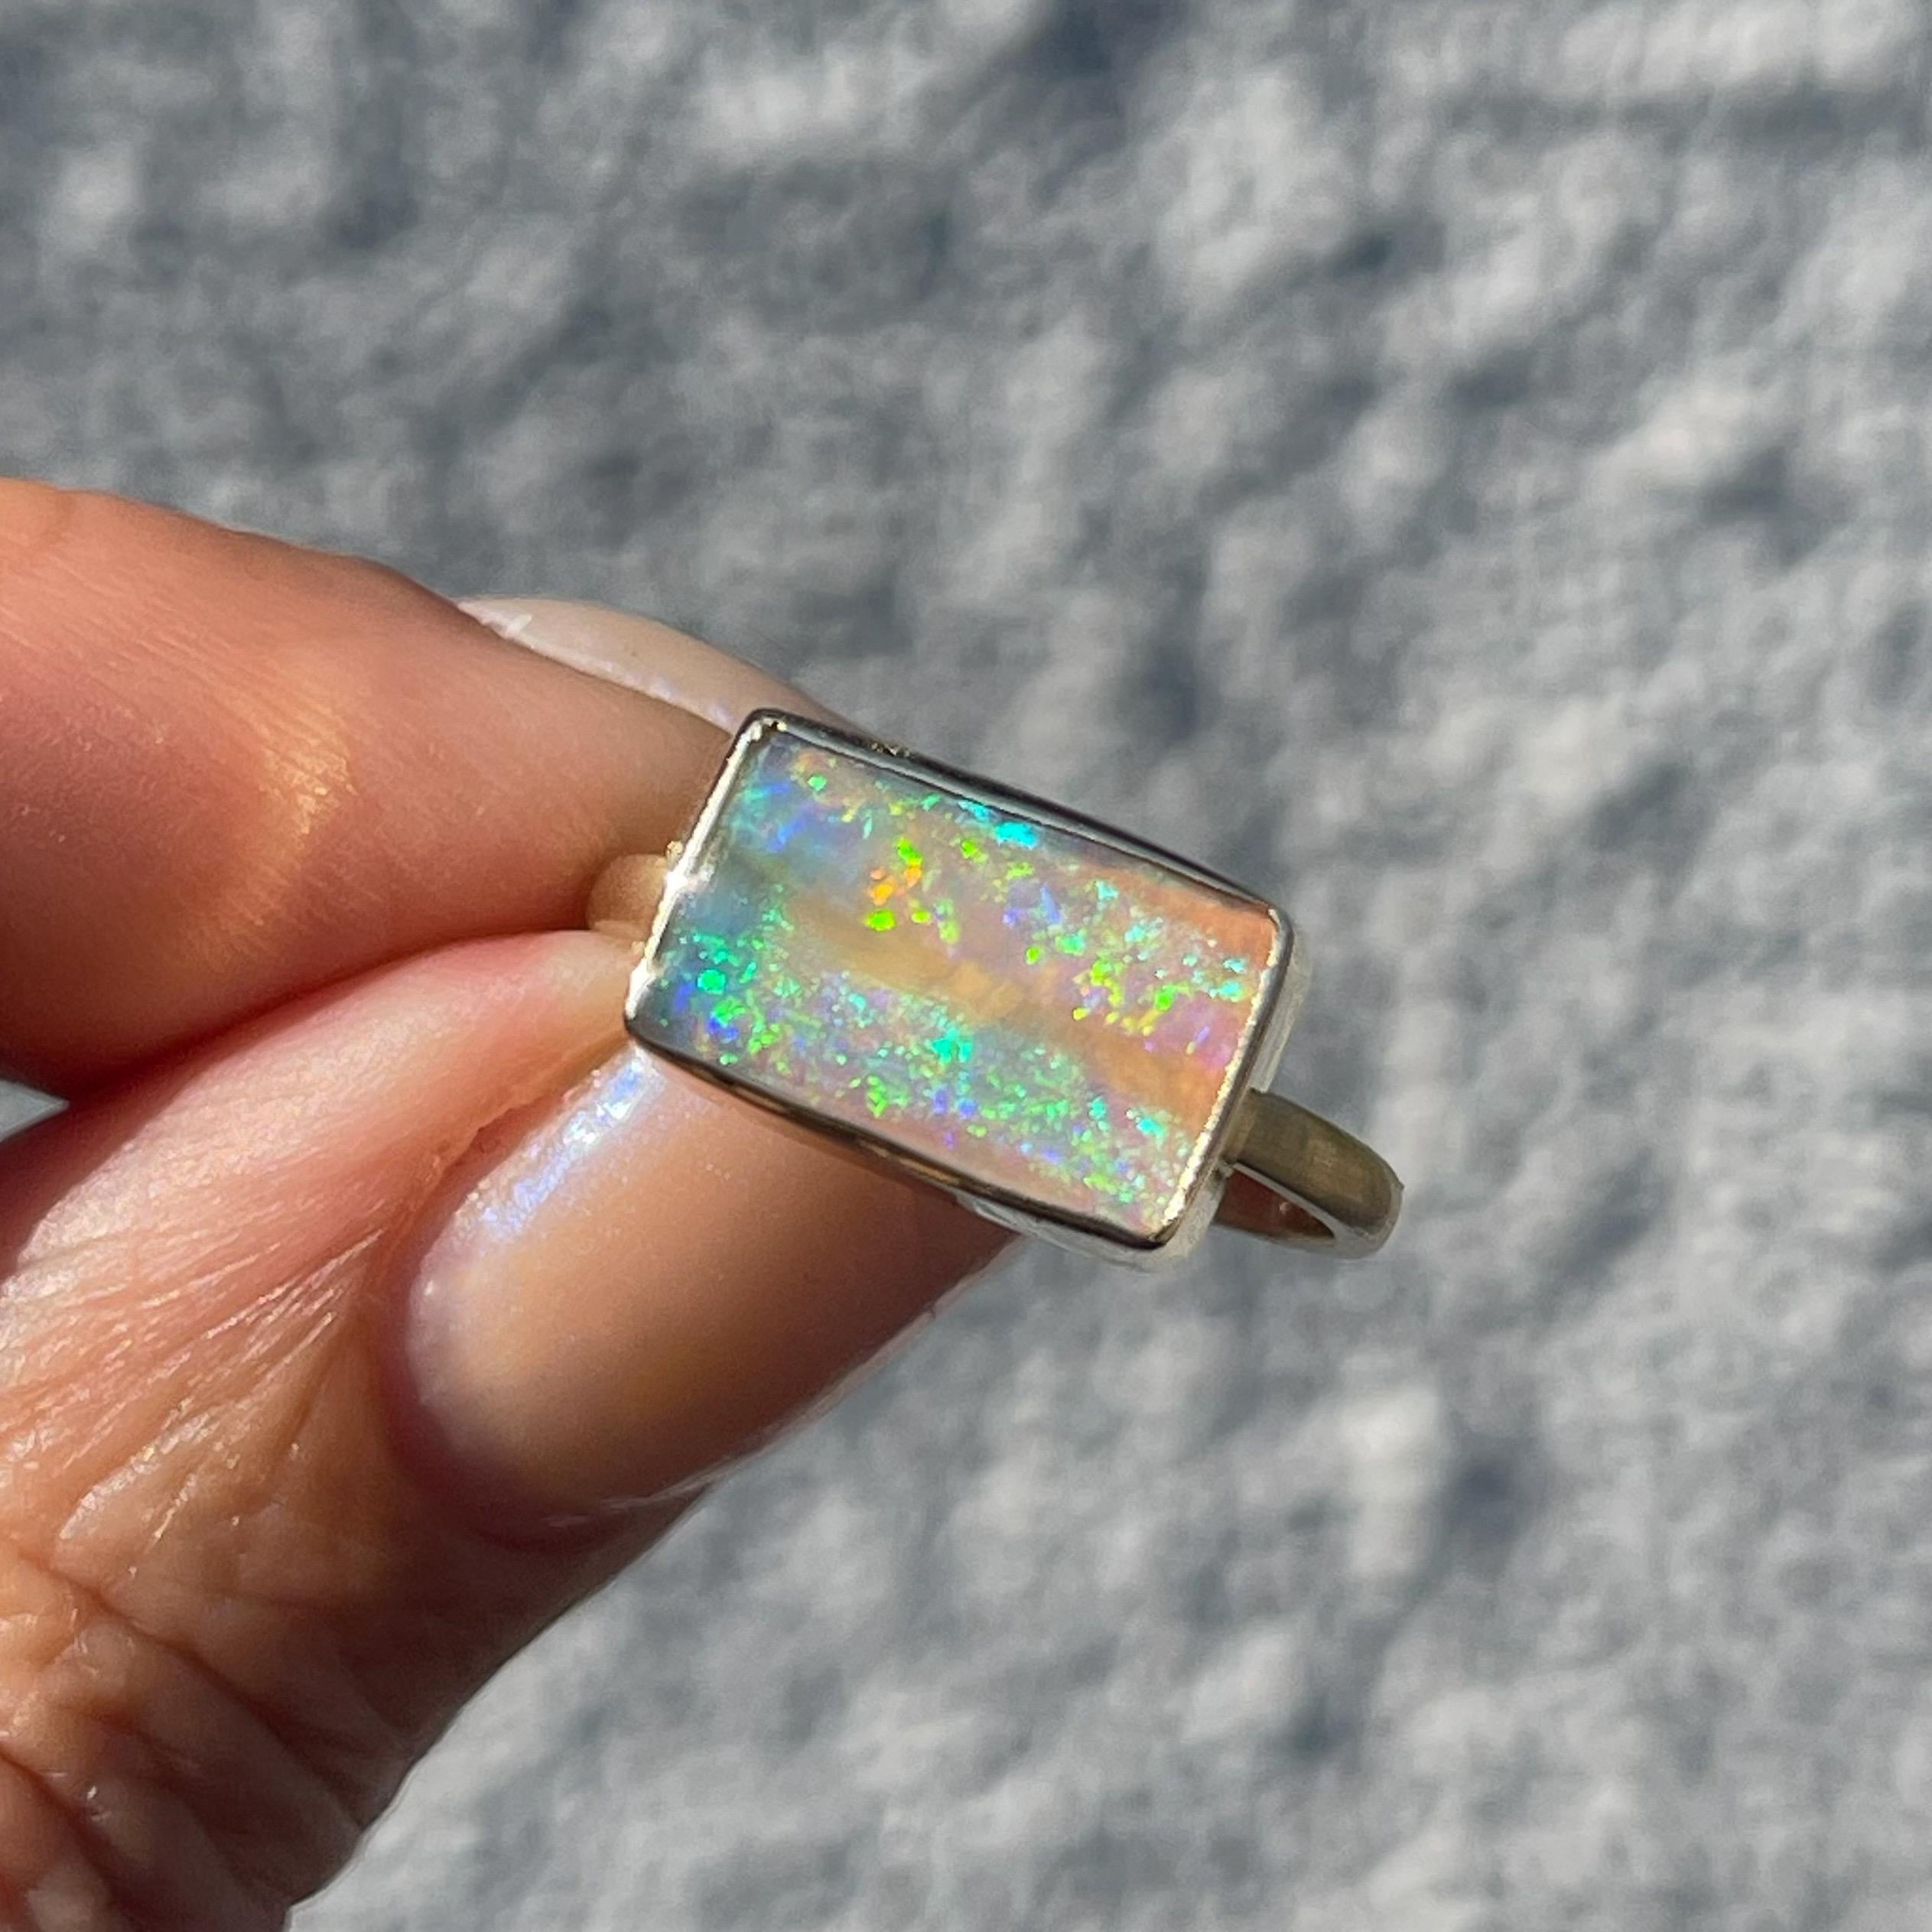 Inside this divine Australian Opal ring, bursts of pigment appear and disperse. Its spectrum of color is intense and elusive; wrapped neatly in the frame of the gold opal ring. With each subtle movement, the colors shift, yet the range of hues